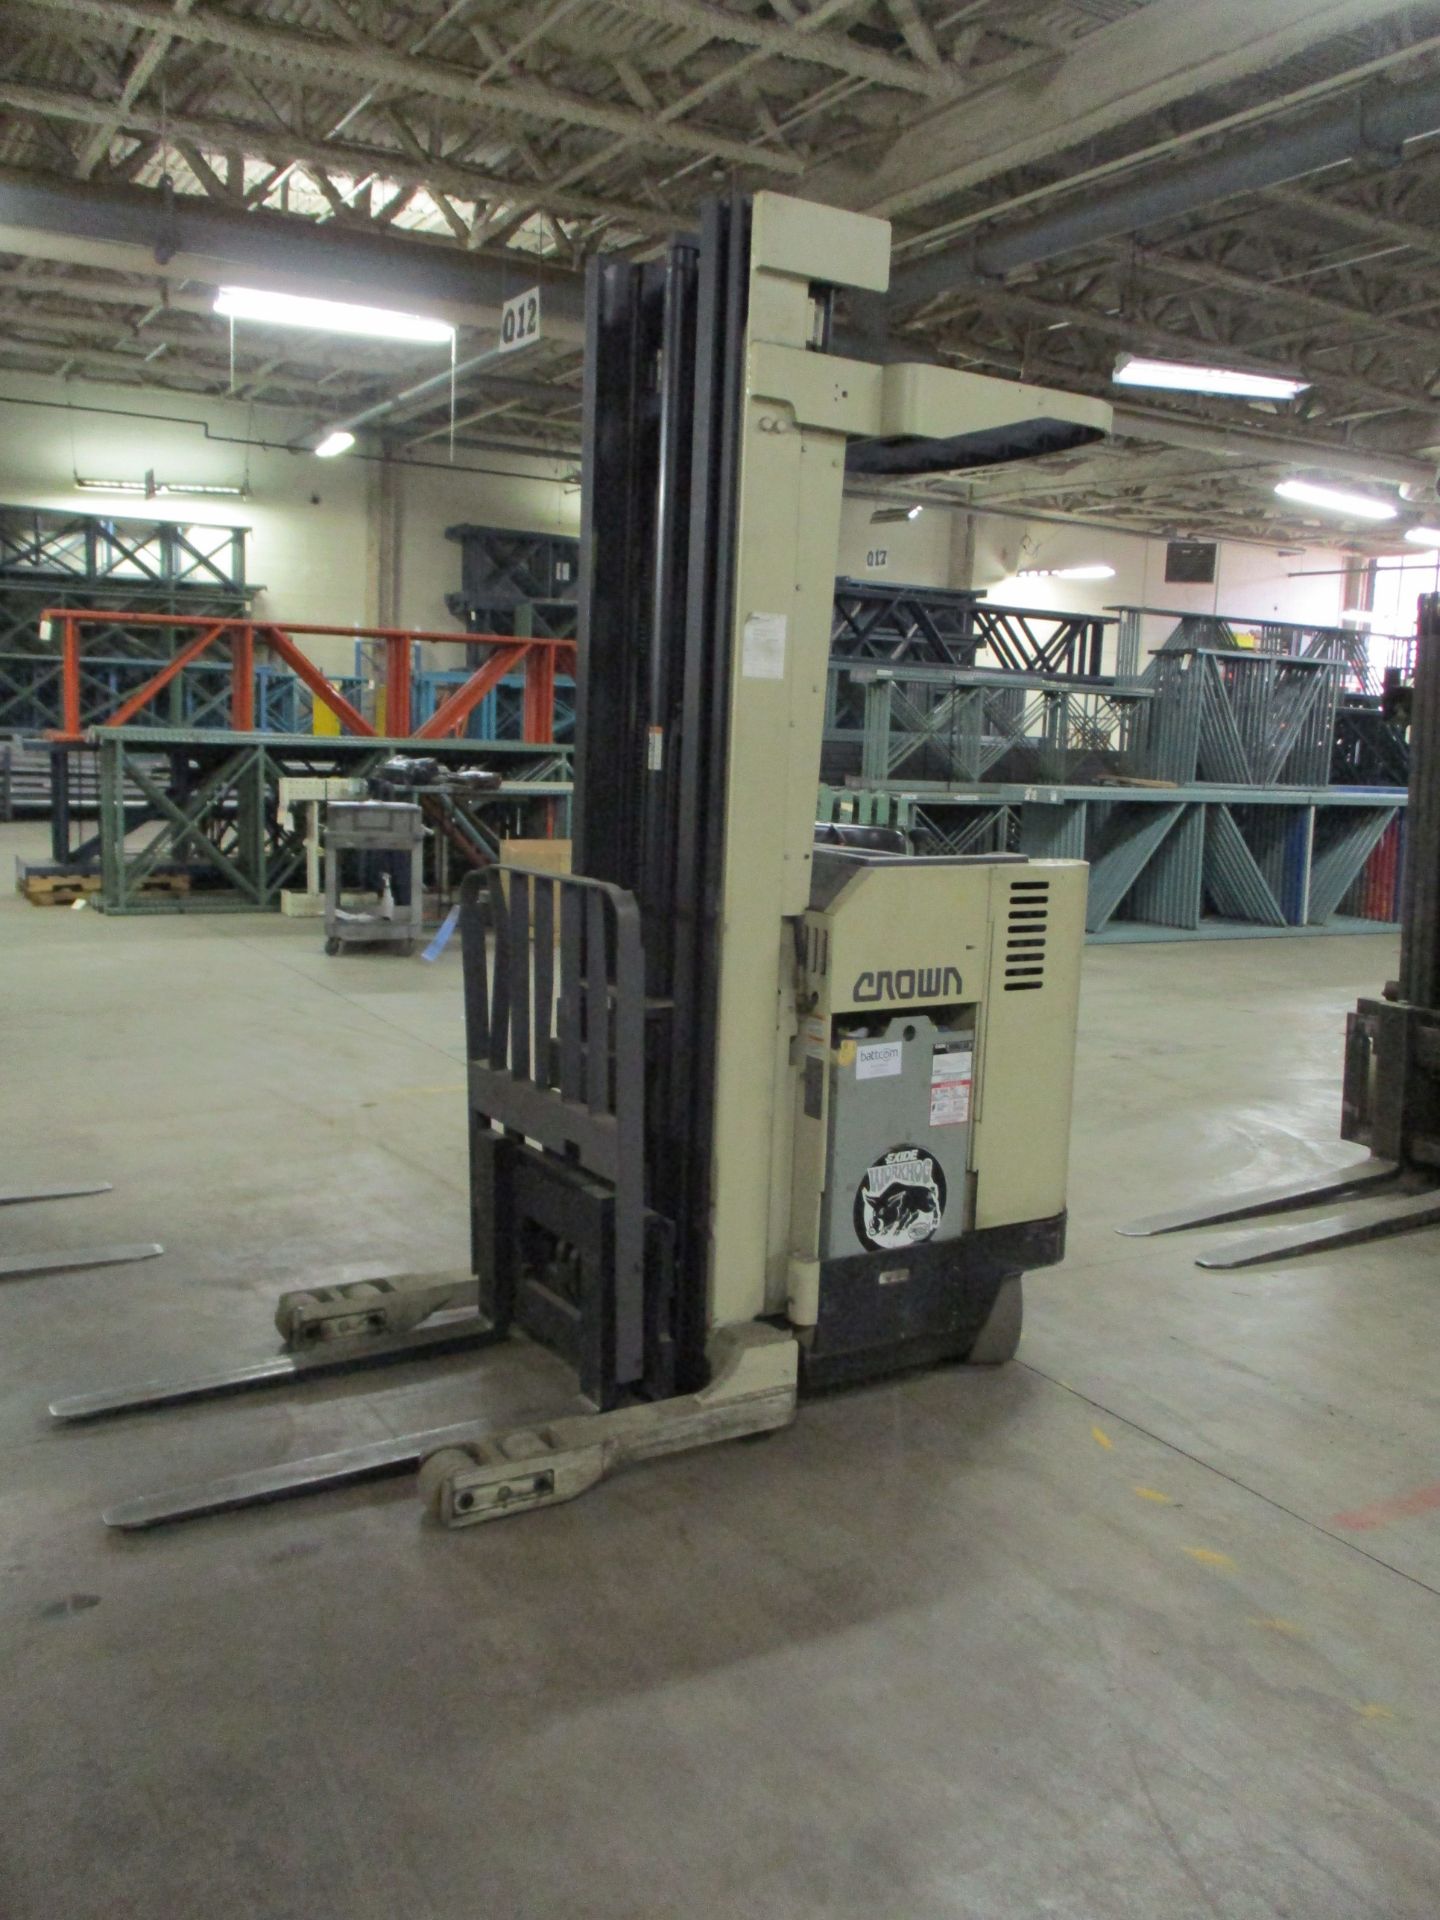 3,500 LB. CROWN MODE3L RR3520-35 ELECTRIC REACH TRUCK; S/N 1A1-74493, 107" MAST HEIGHT, 42" FORKS, - Image 2 of 7